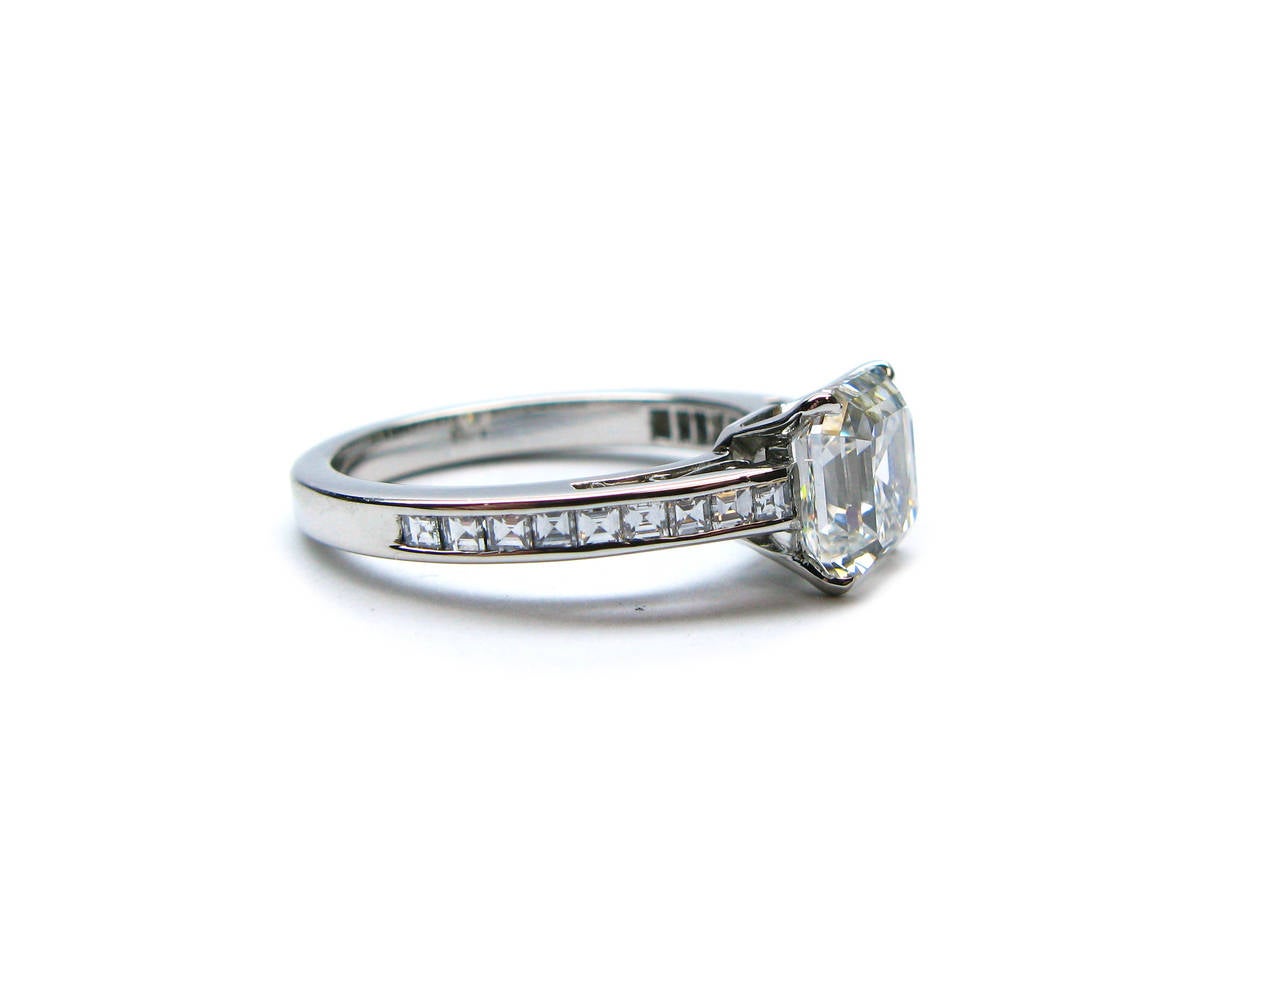 This GIA certified 2.06 ct F color VS2 clarity Asscher cut diamond is set in a beautiful platinum ring with small Asscher cut diamonds set into the band. This ring is sure to dazzle anyone in its tracks.